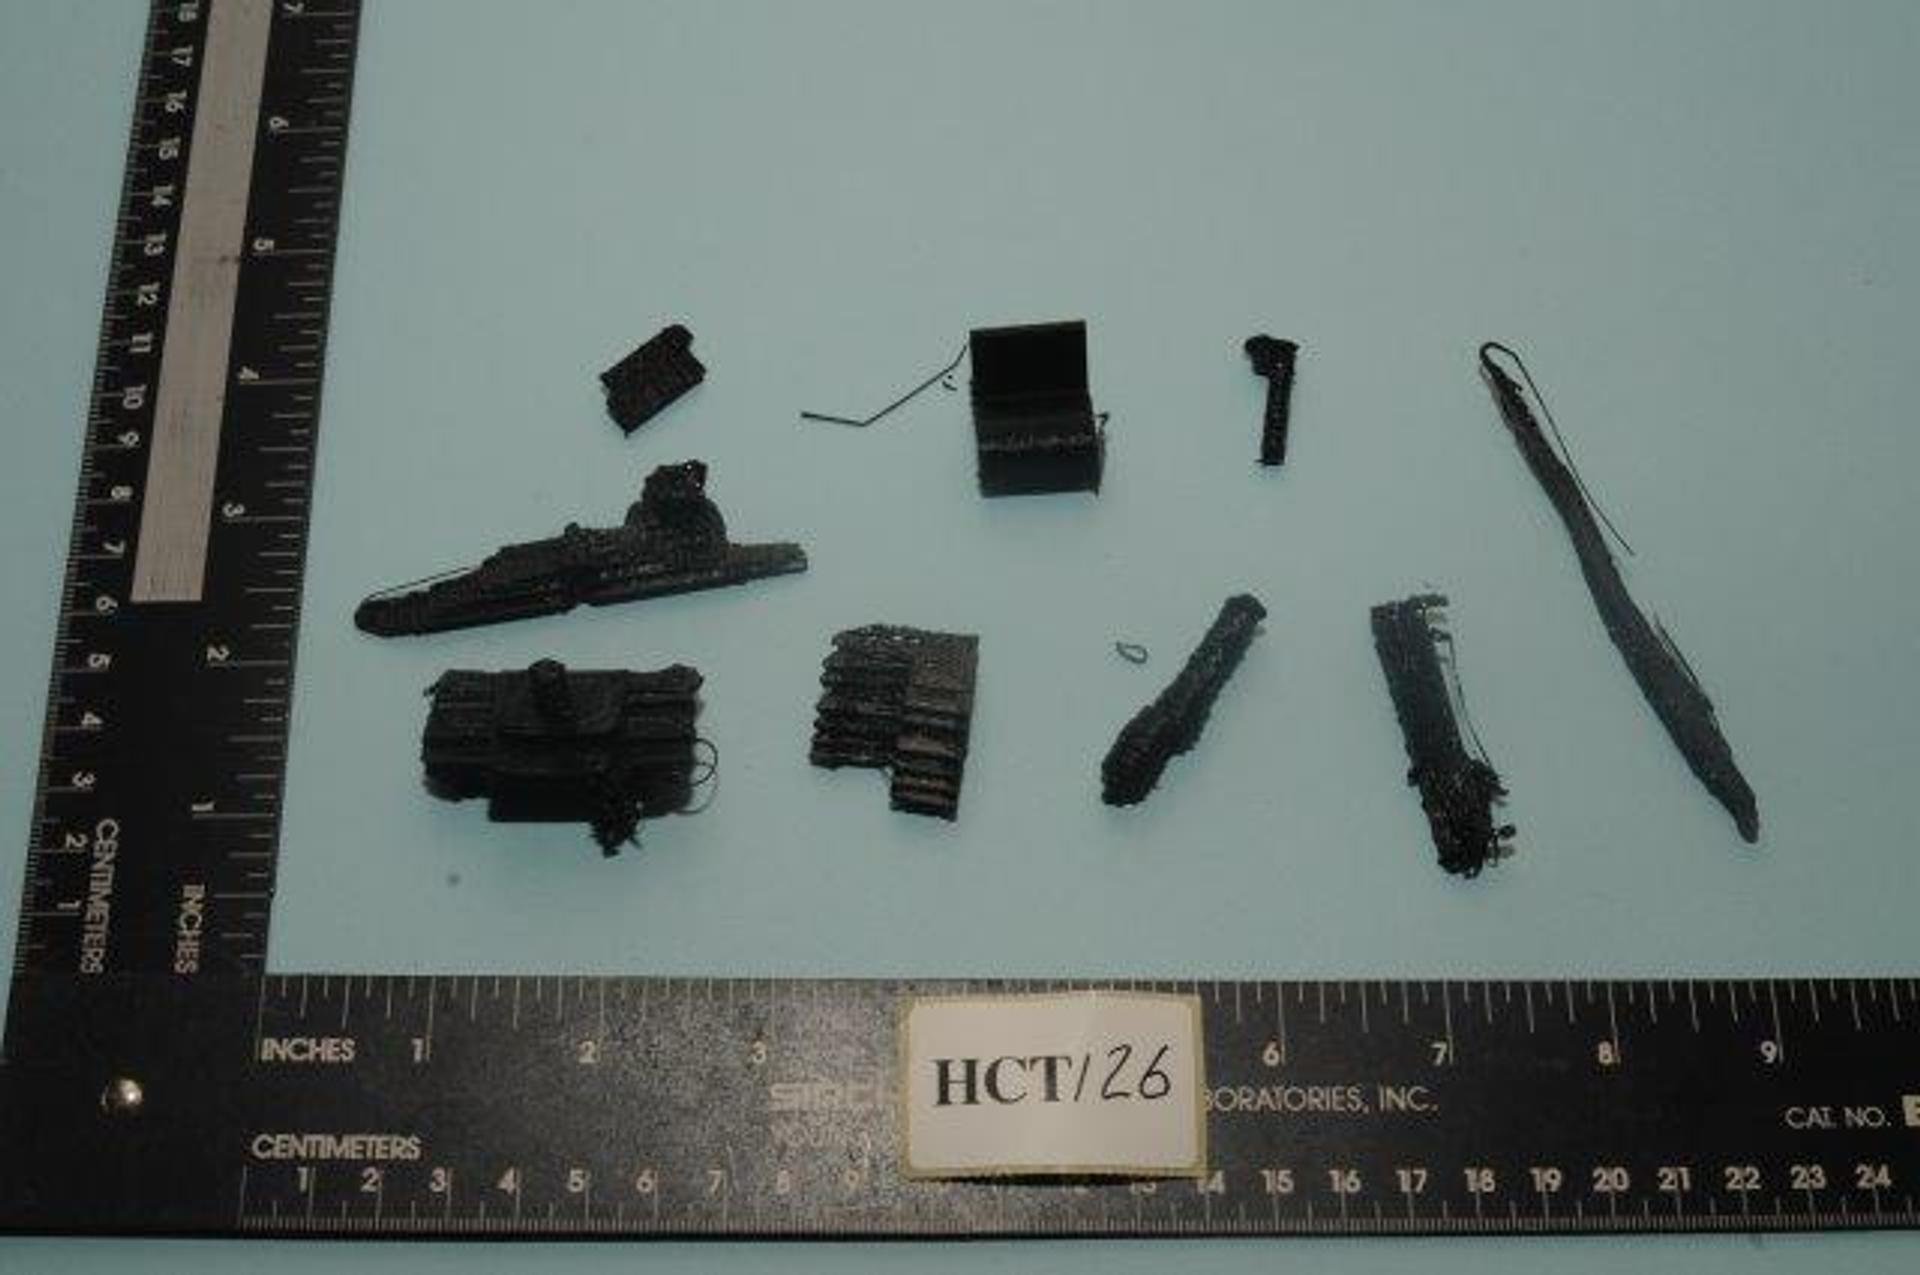 Plastic parts of a gun, which Harris attempted to 3D-print.